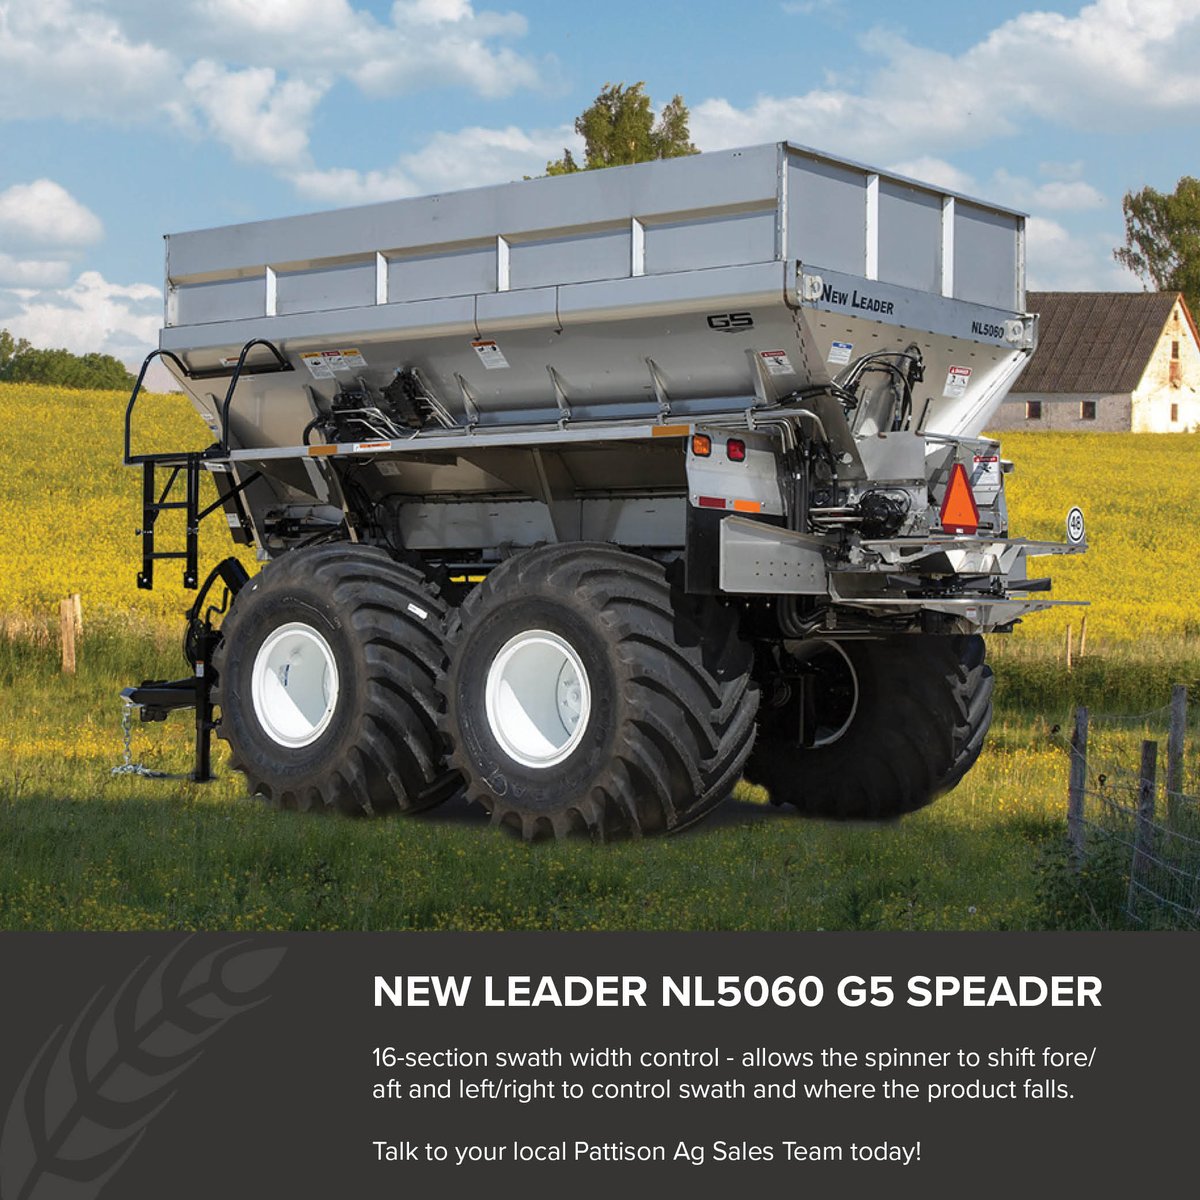 Say goodbye to wasted nutrients and hello to precise application with a swath width control technology. Our New Leader NL5060 G5 Spreader increases efficiency, reduce overlap, and target the right product to the right place. Shop Now: ow.ly/Y3xi50R8IfW #PattisonAg